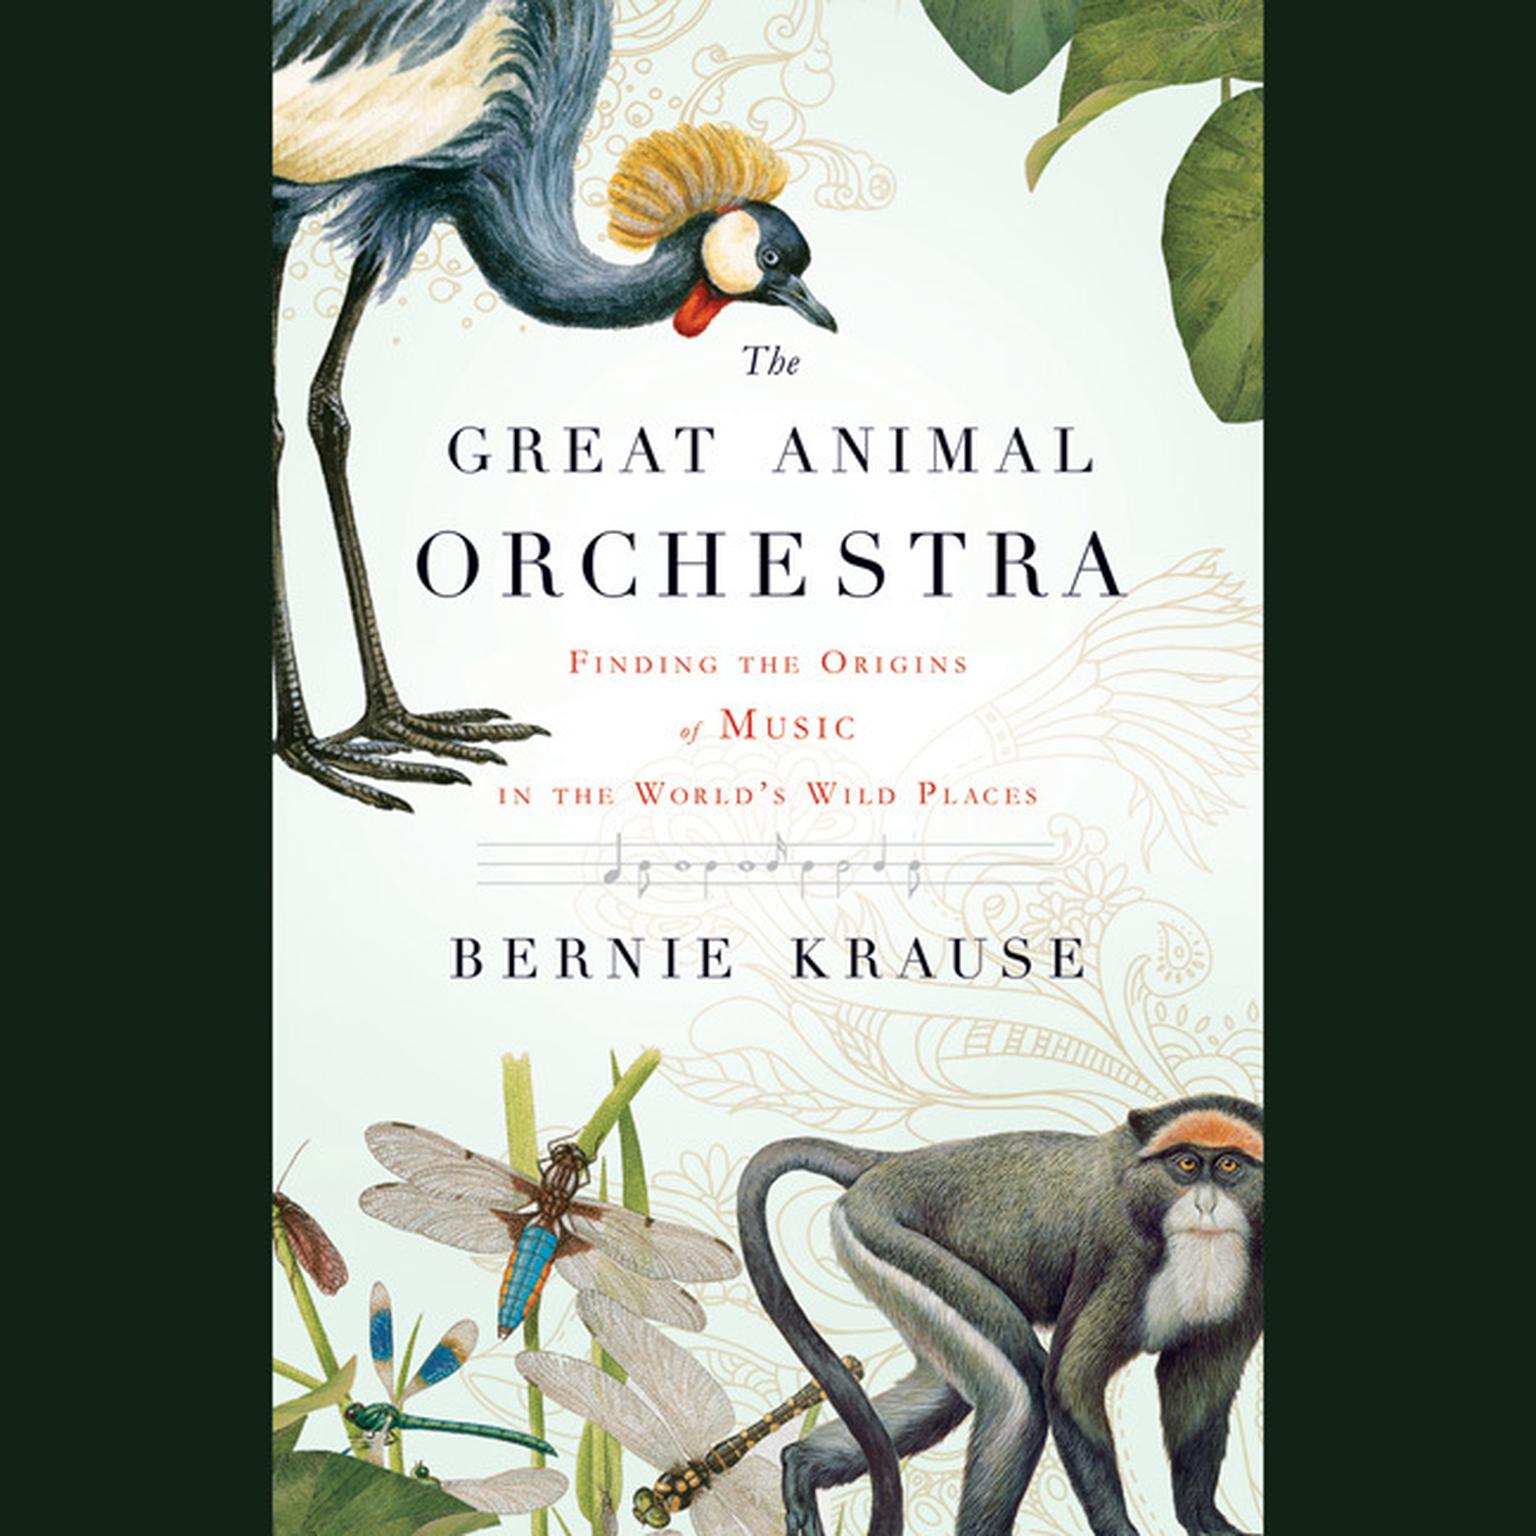 The Great Animal Orchestra: Finding the Origins of Music in the Worlds Wild Places Audiobook, by Bernie Krause